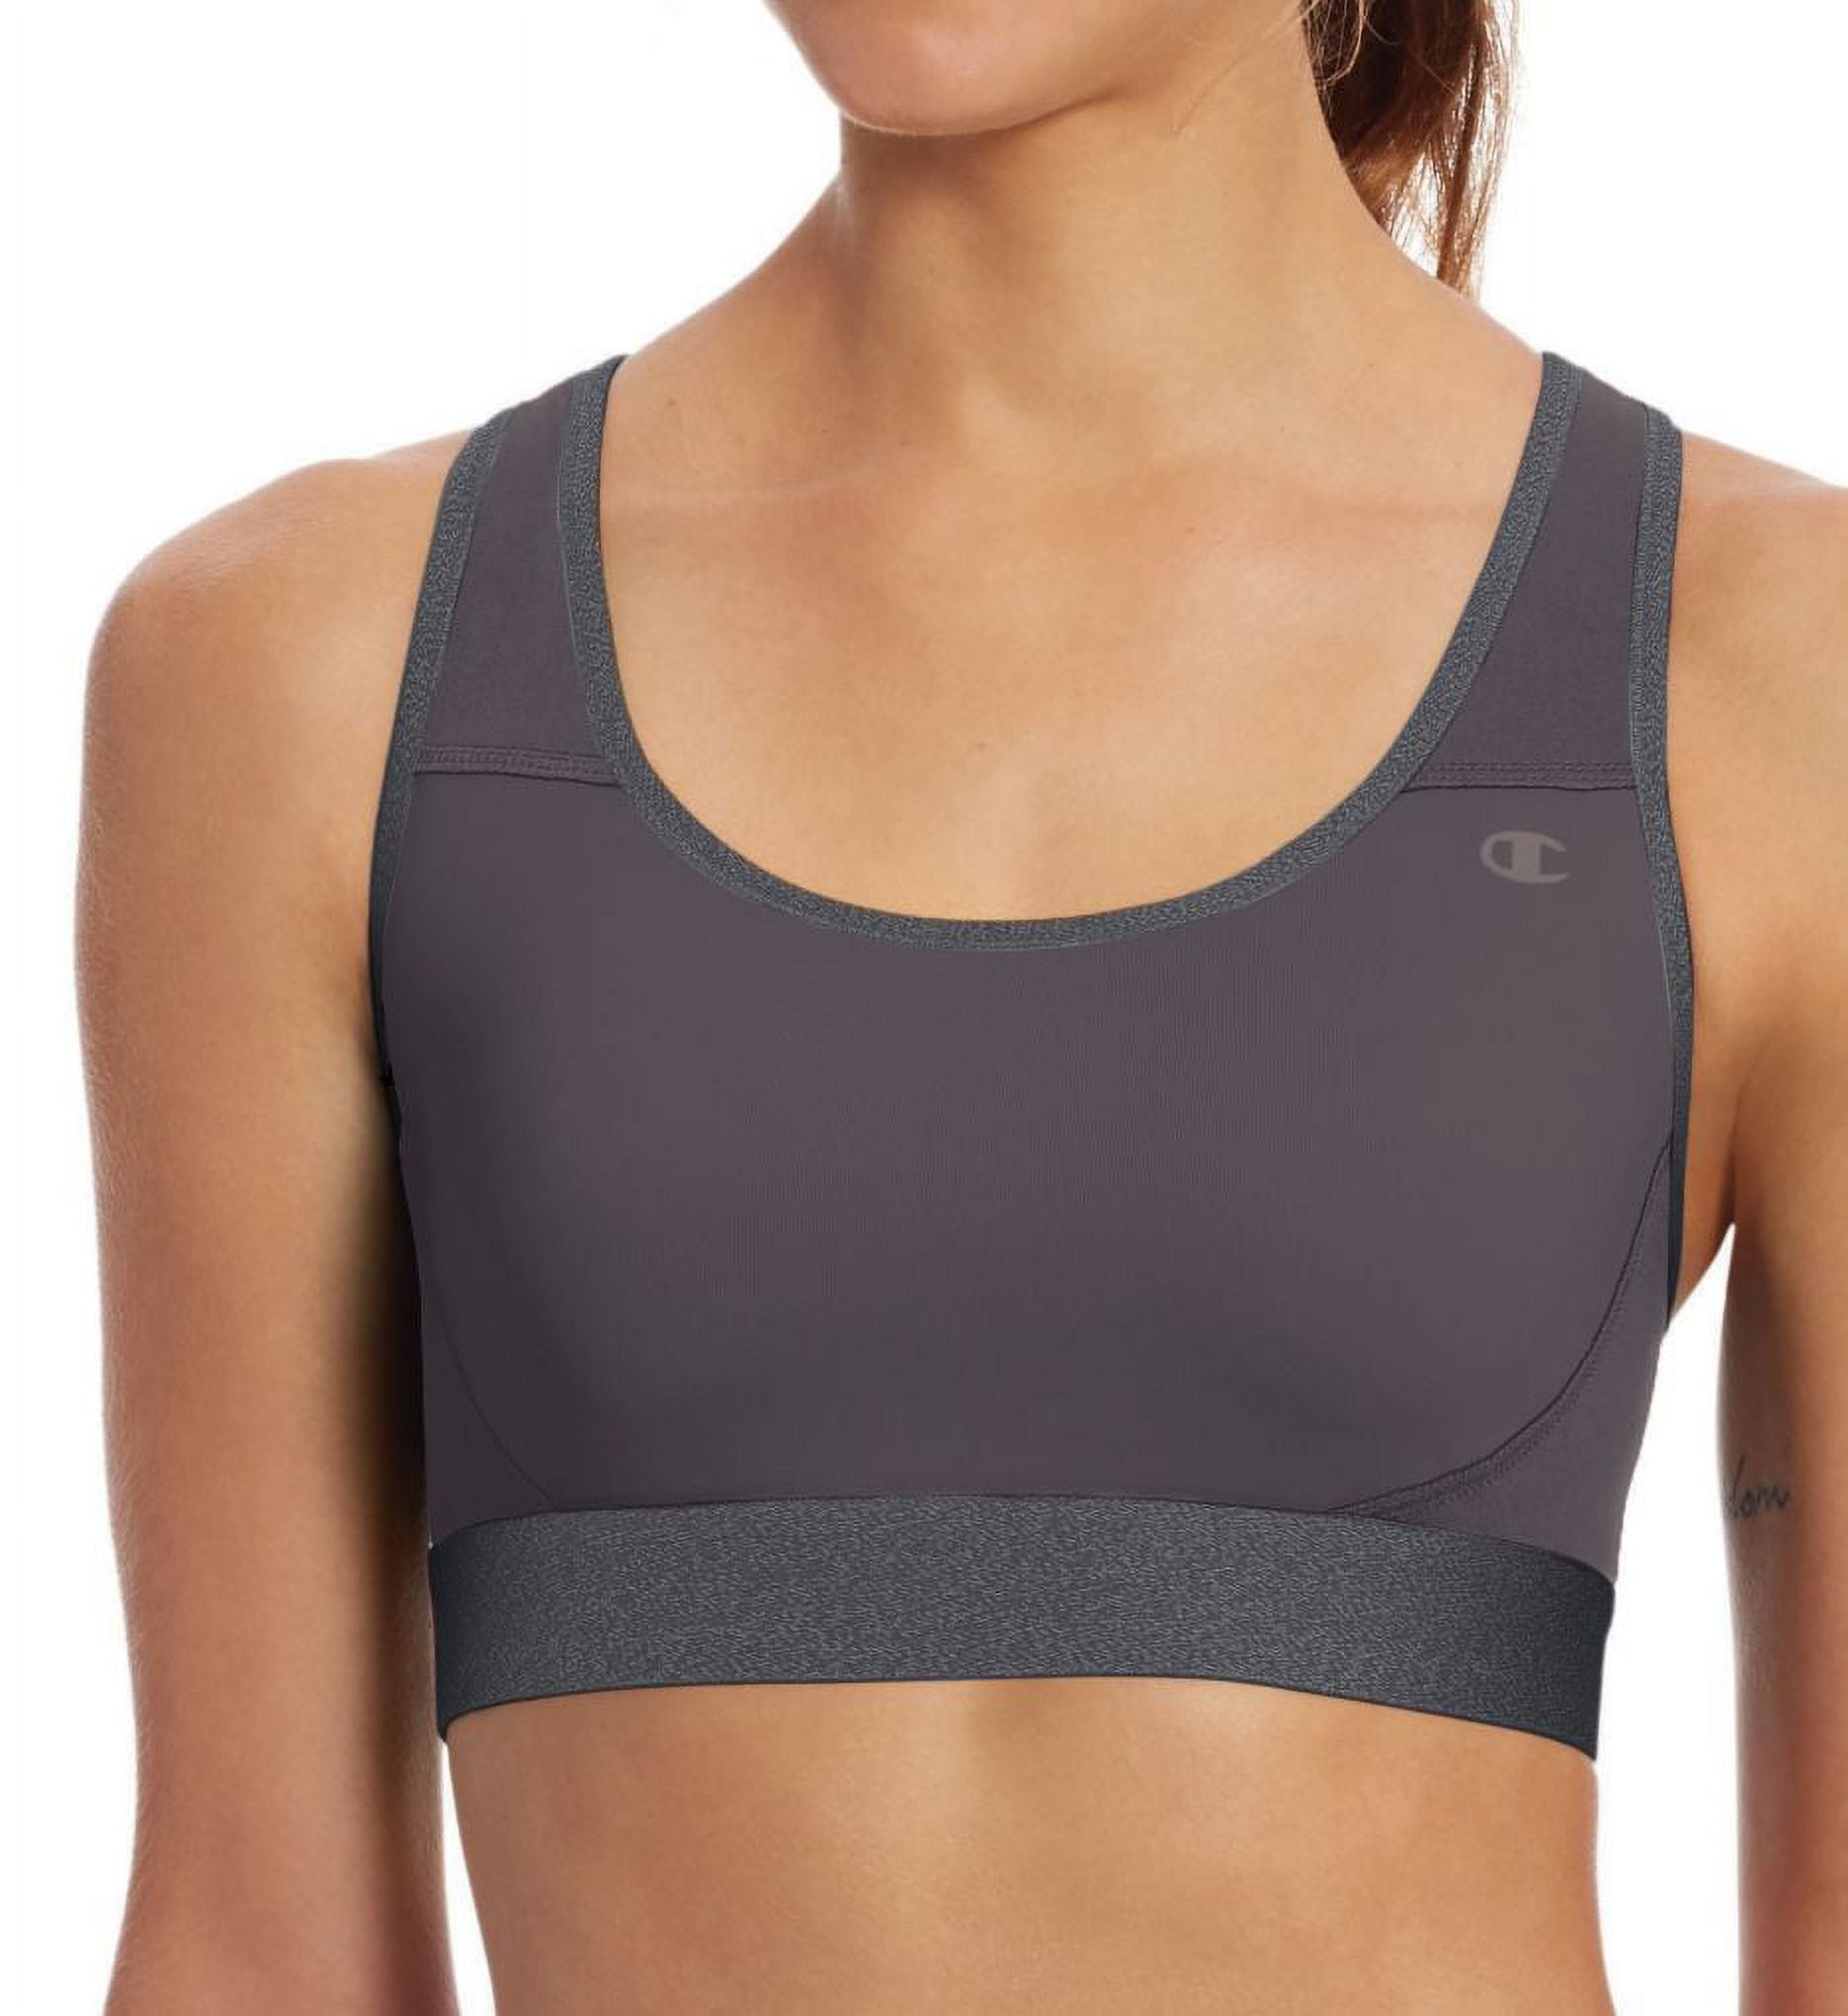 Women's Champion B1251 The Absolute Workout Double Dry Sports Bra